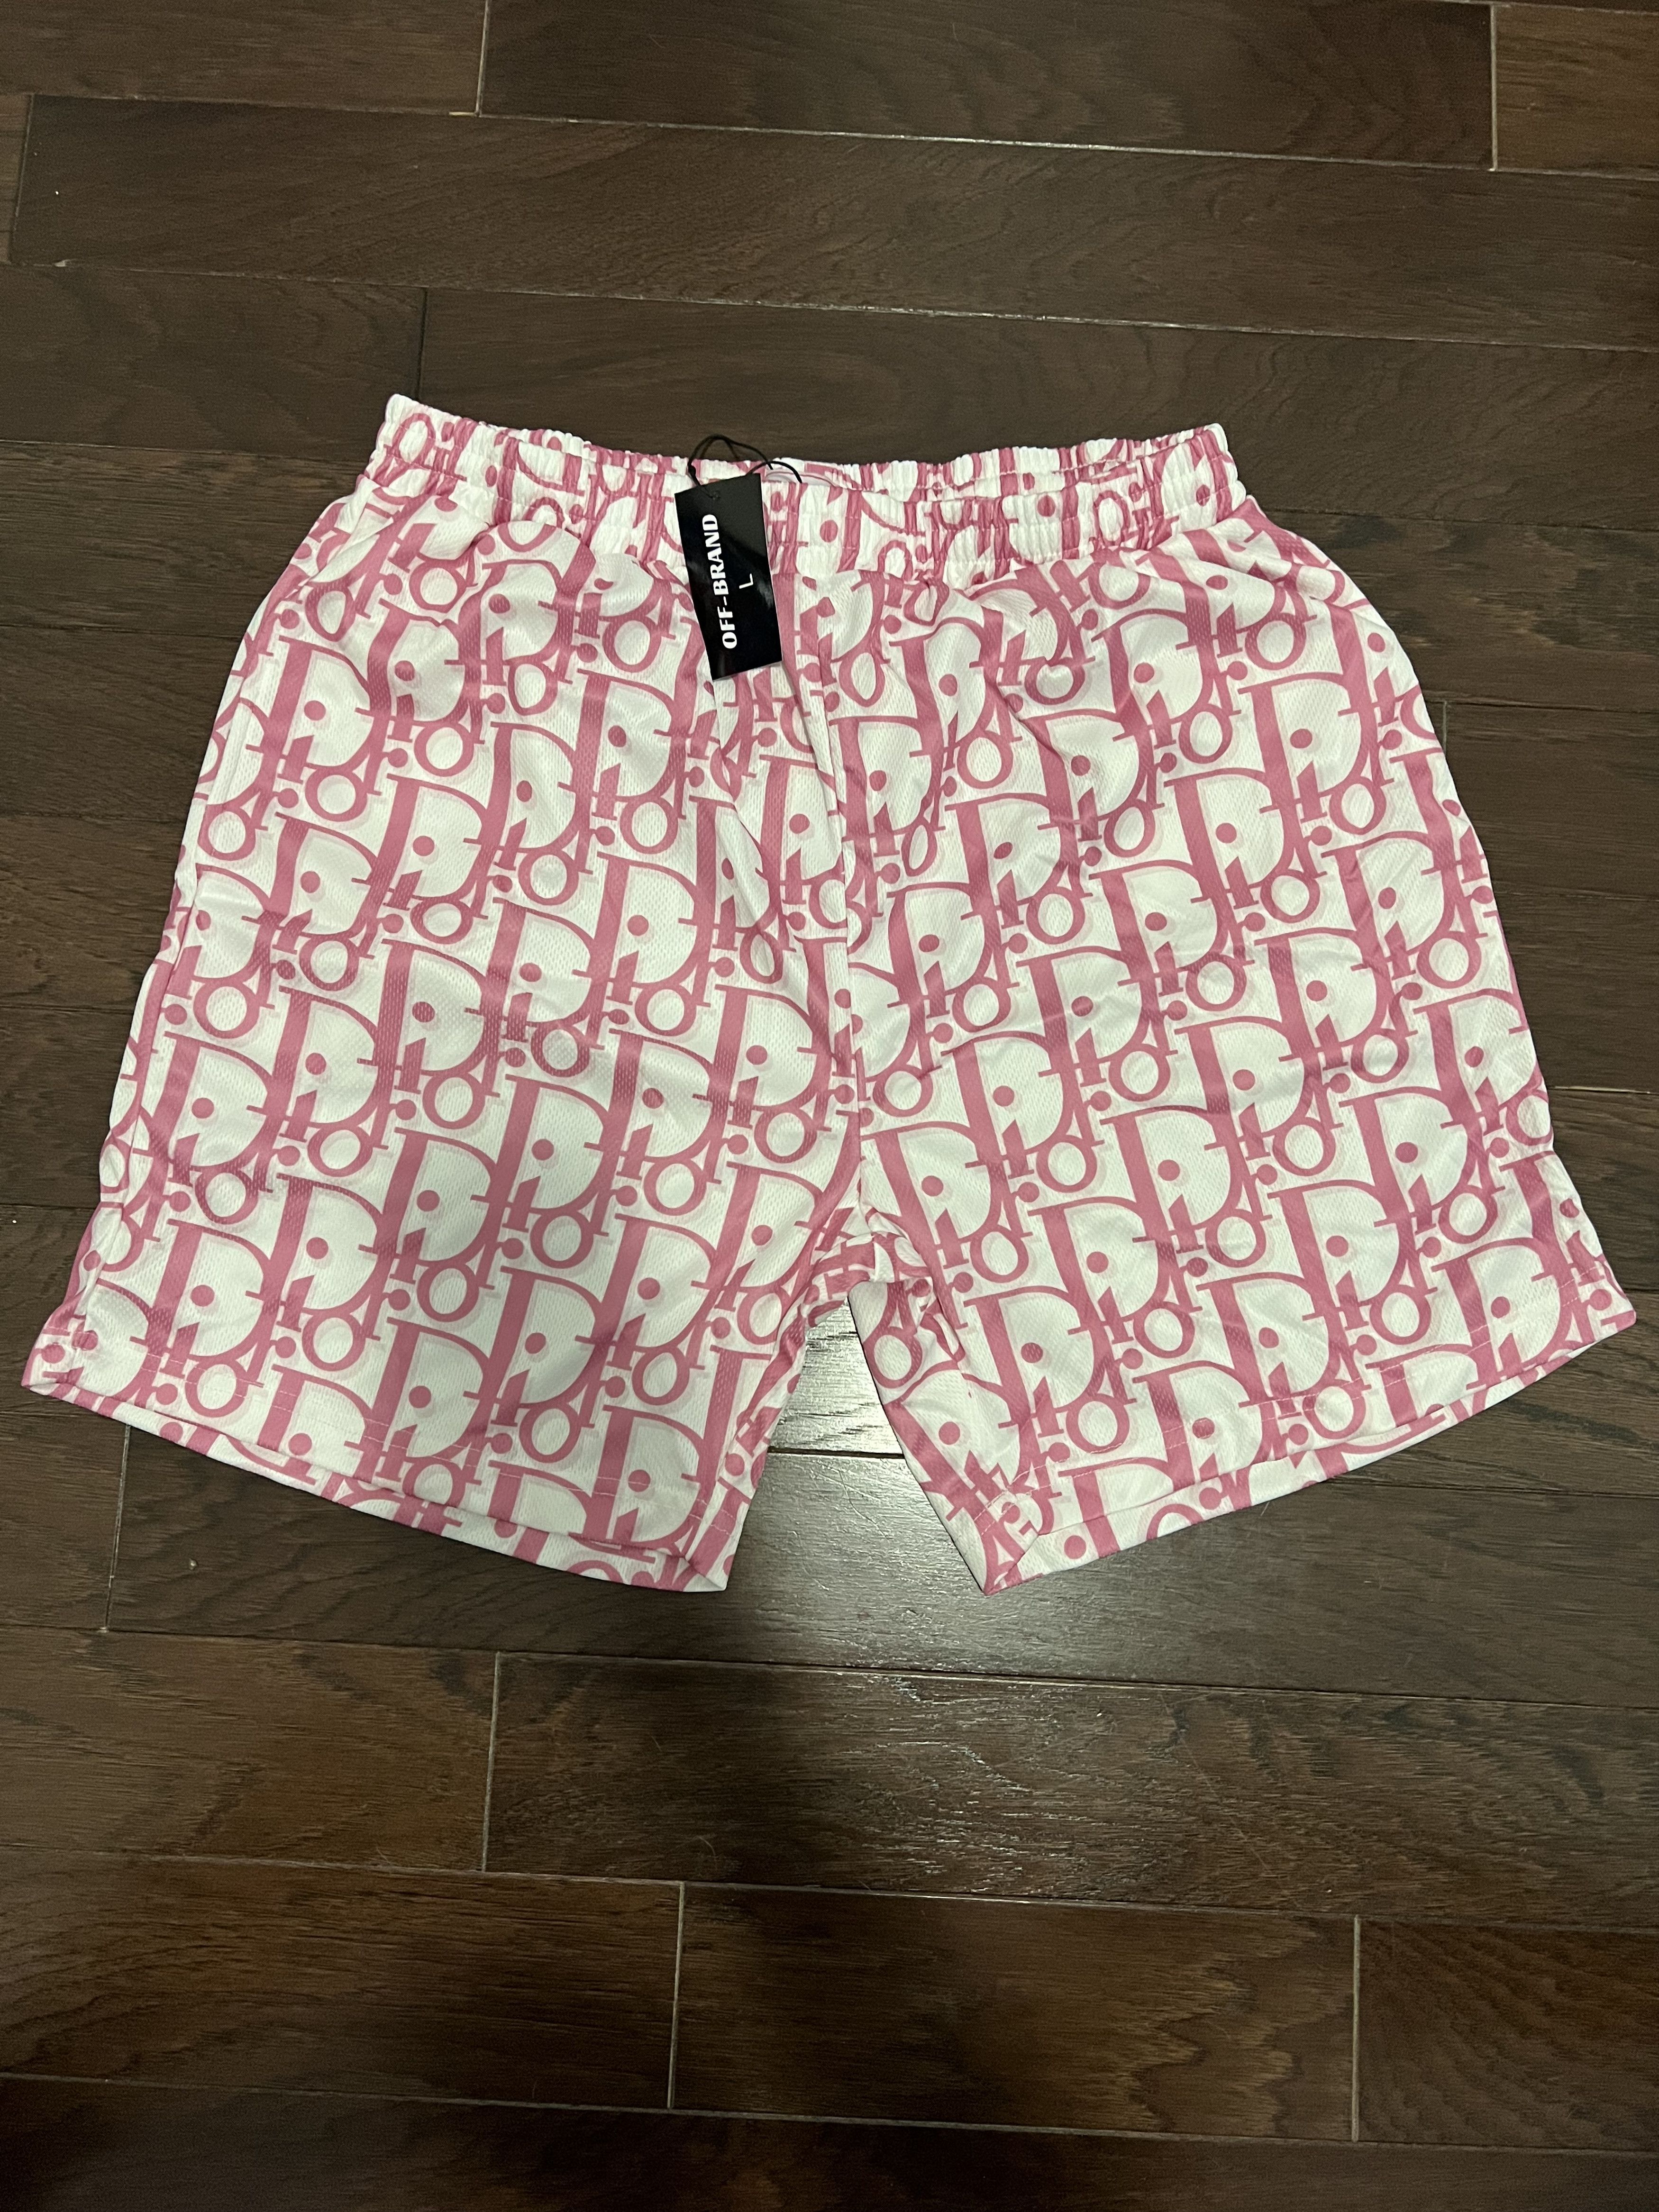 Other Off-Brand Dior Basketball Shorts | Grailed